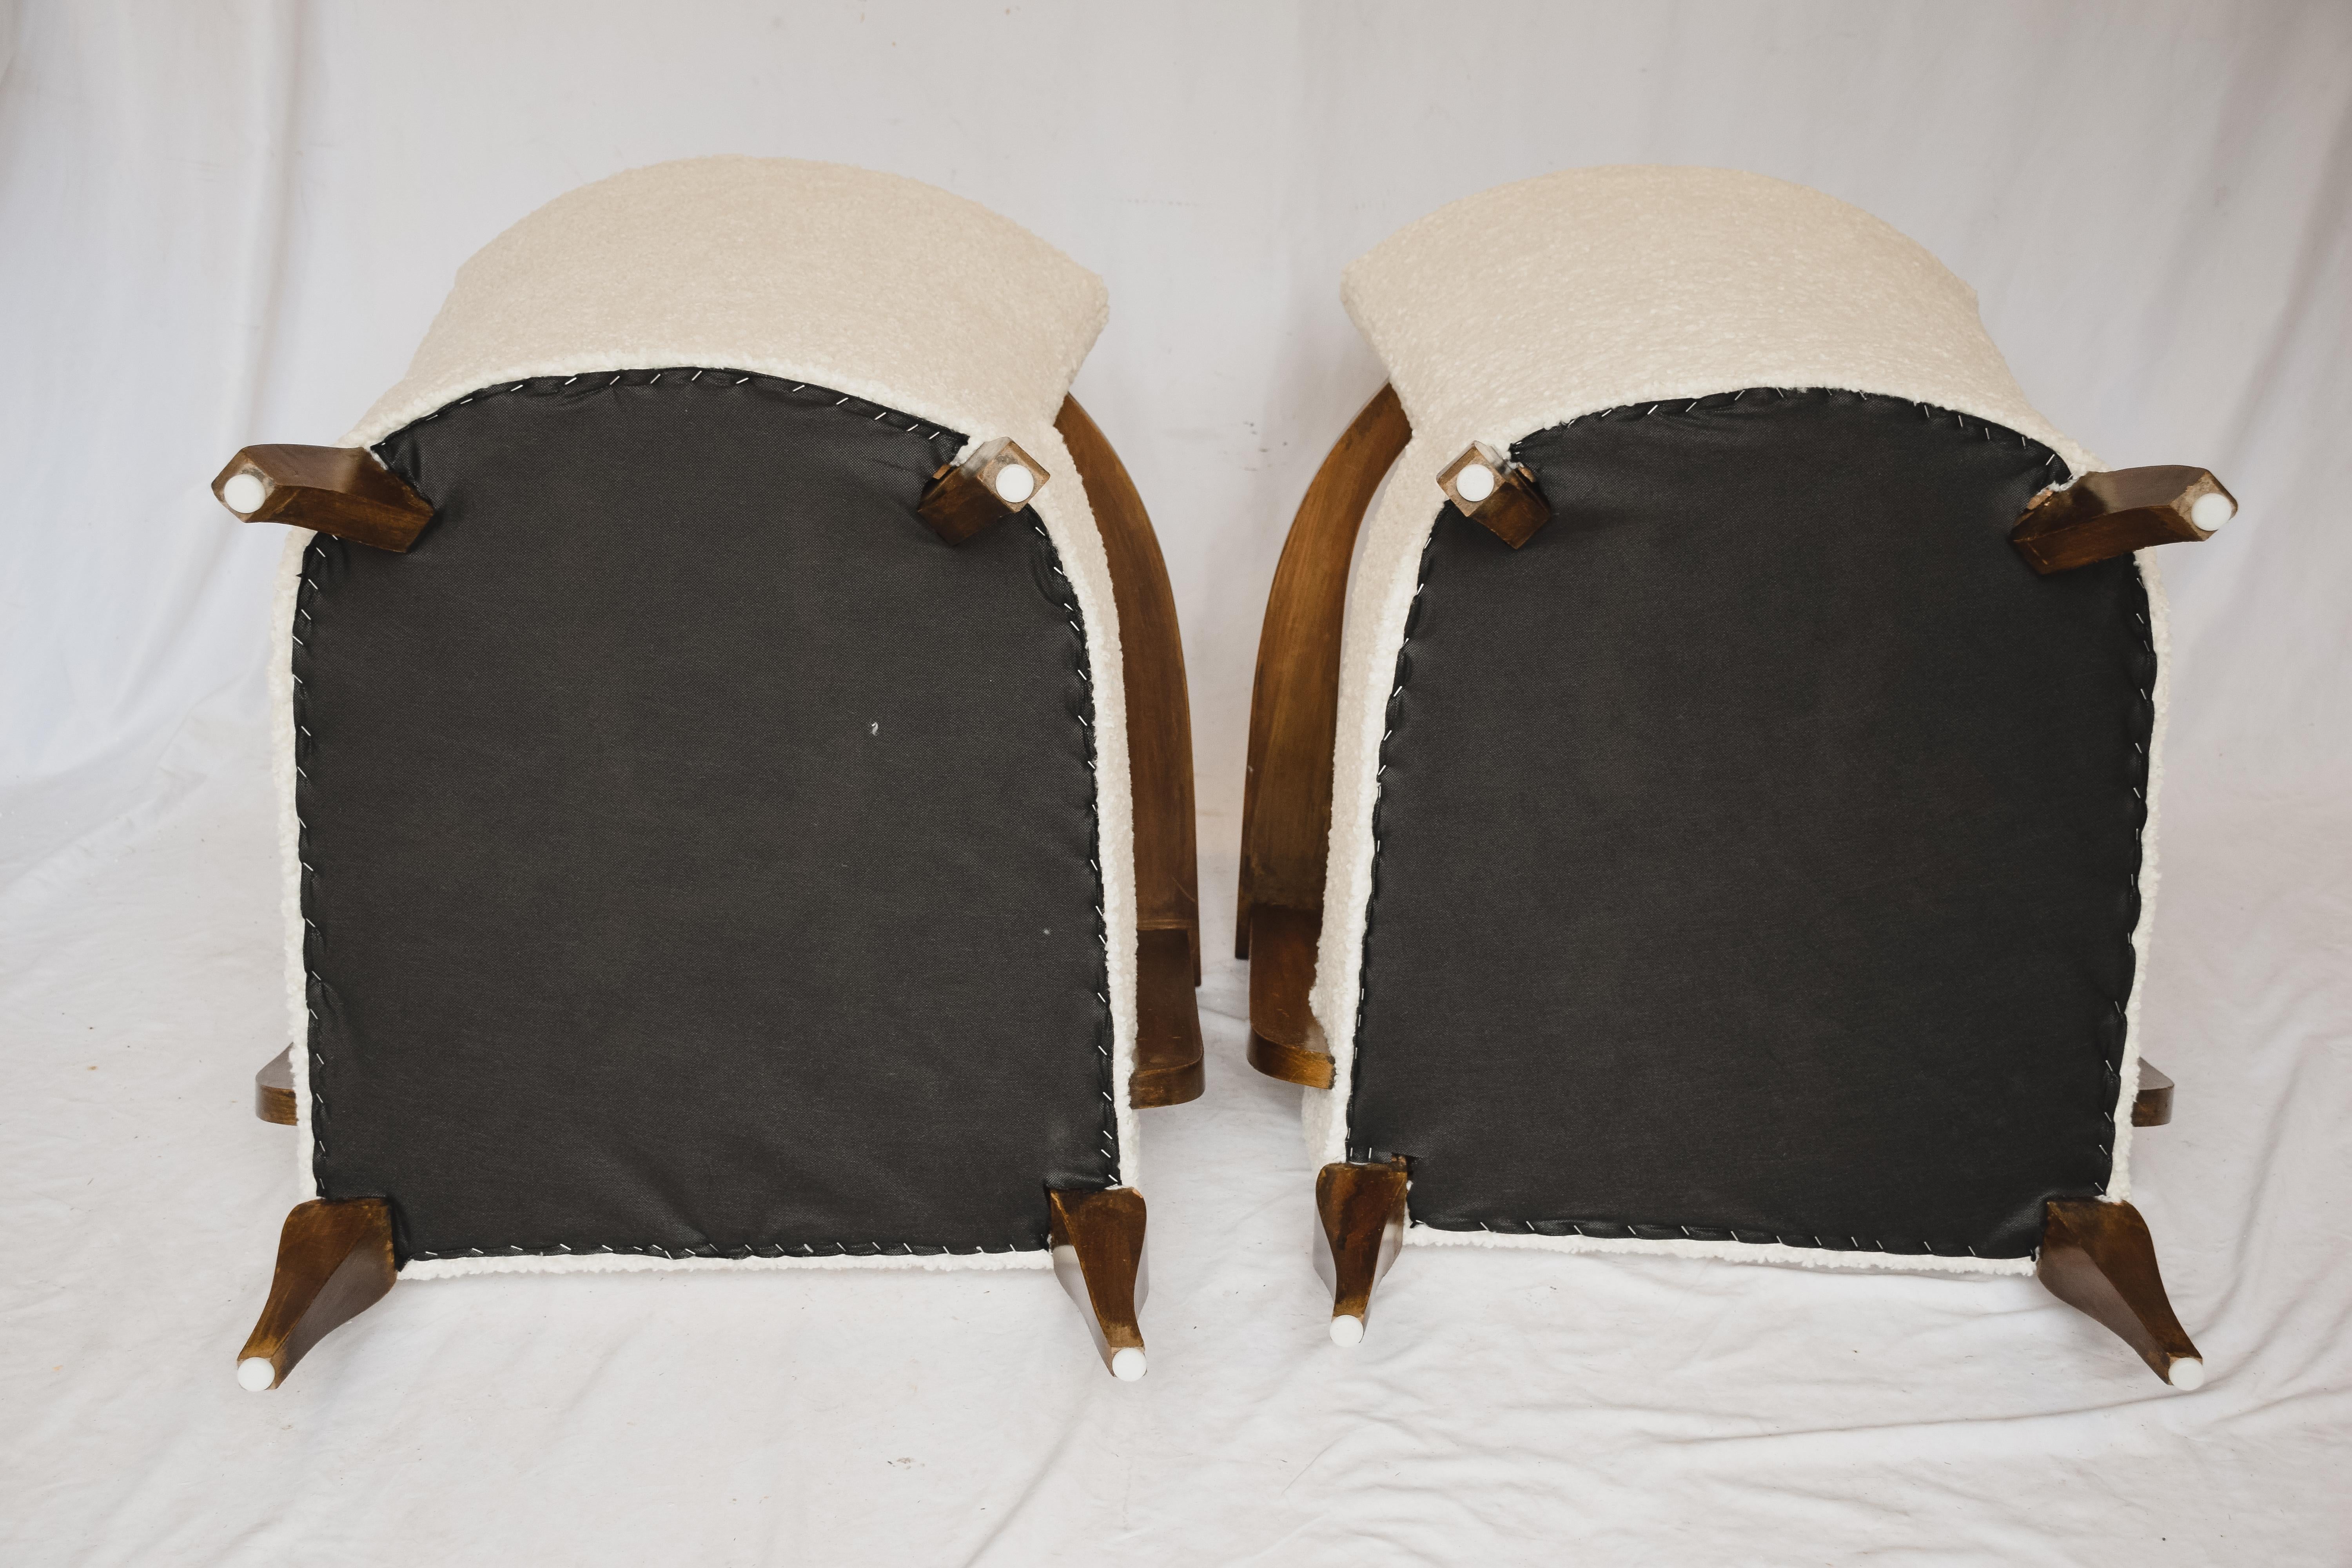 Built with relaxation in mind, this pair of vintage arm chairs in newly recovered Lee Industries Sherpa fabric are in a word, fabulous. These chairs are in really good condition, comfortable, and very sheik. The perfect chairs to cozy up with a good